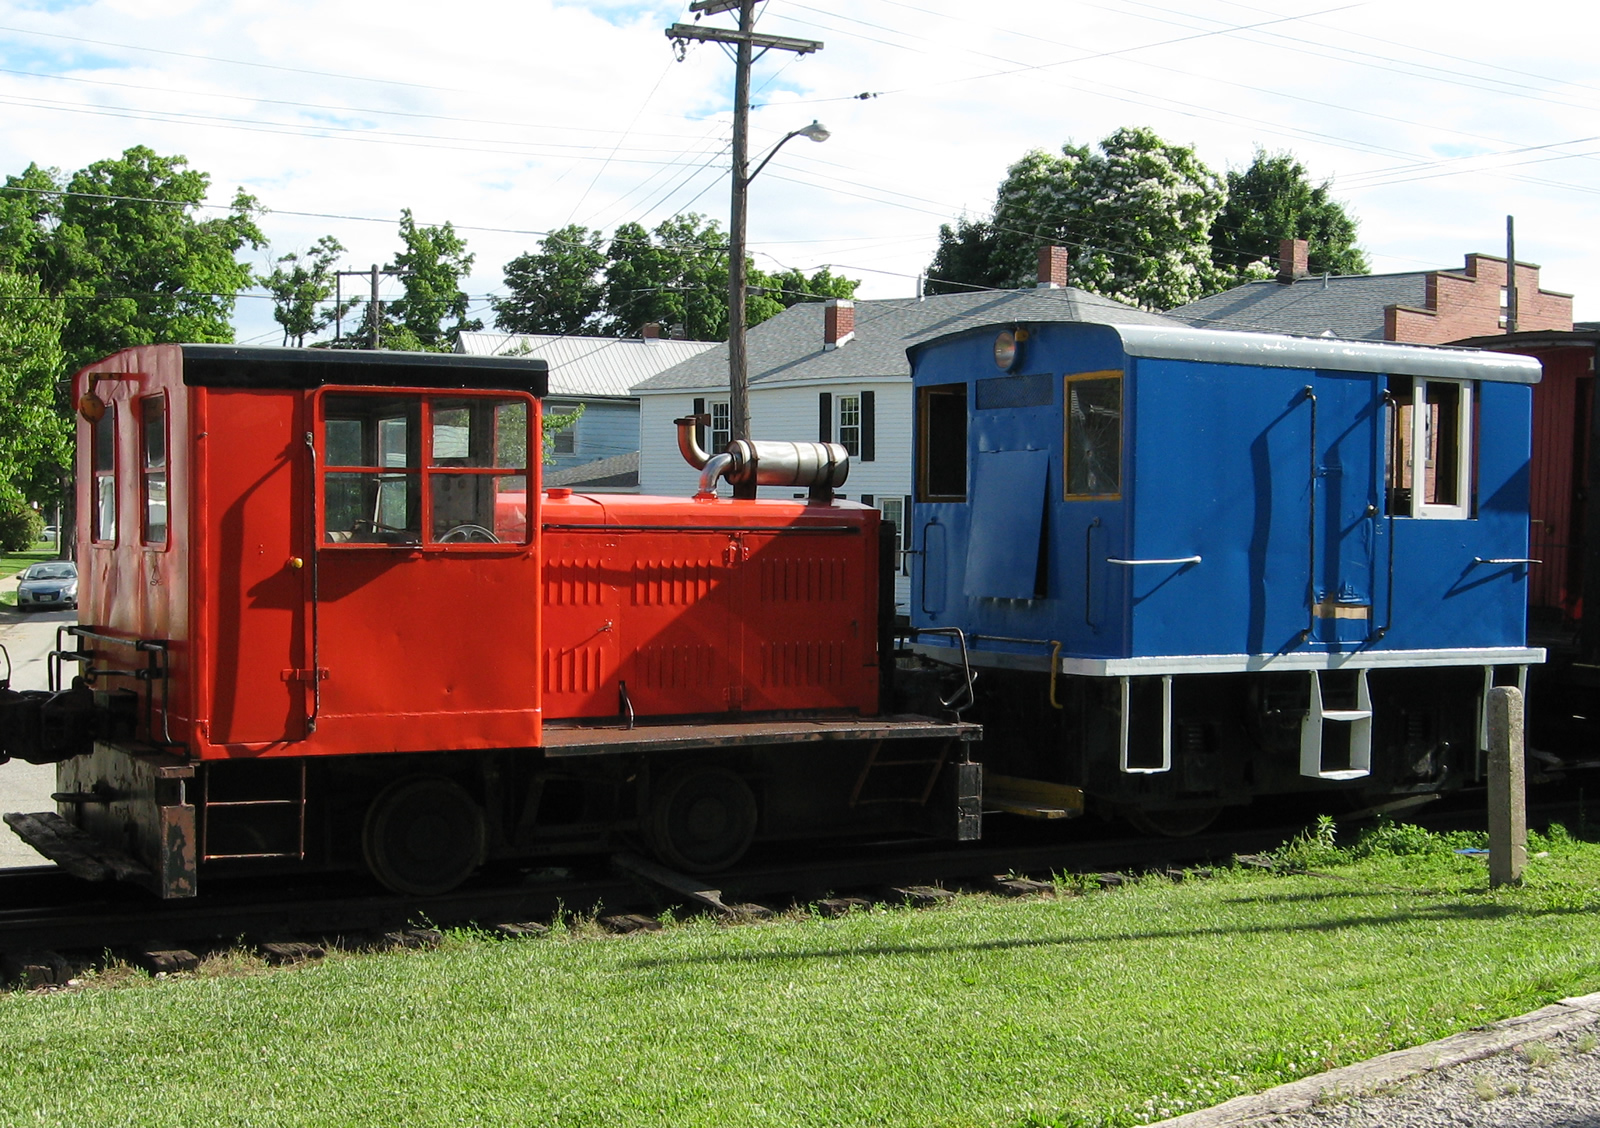 The Plymouth in red and the GE in blue